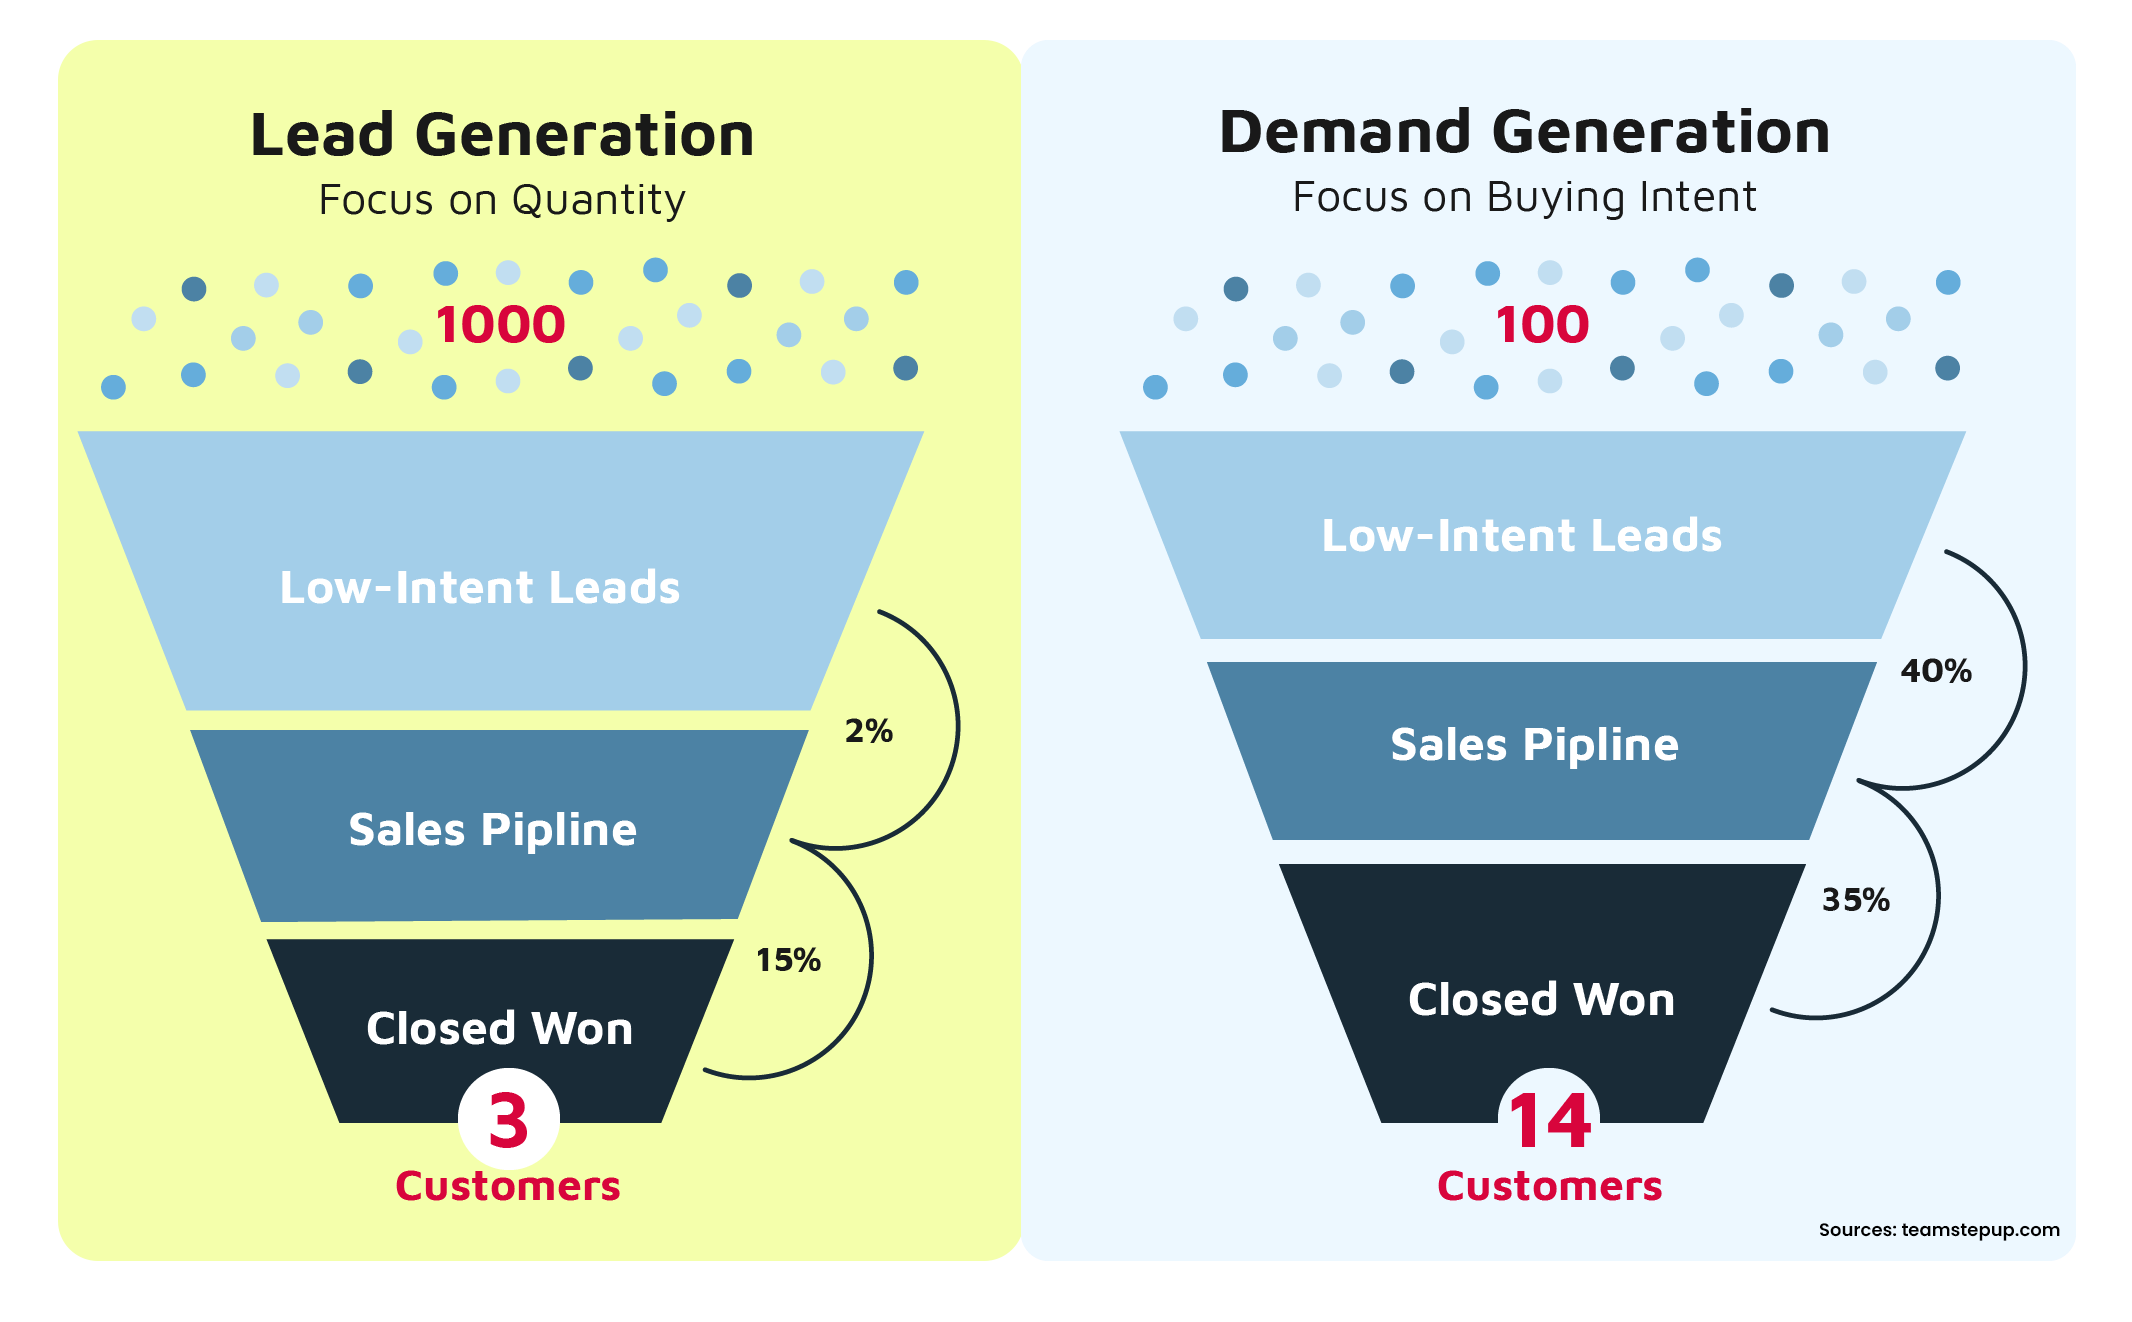 primary difference between demand generation and lead generation